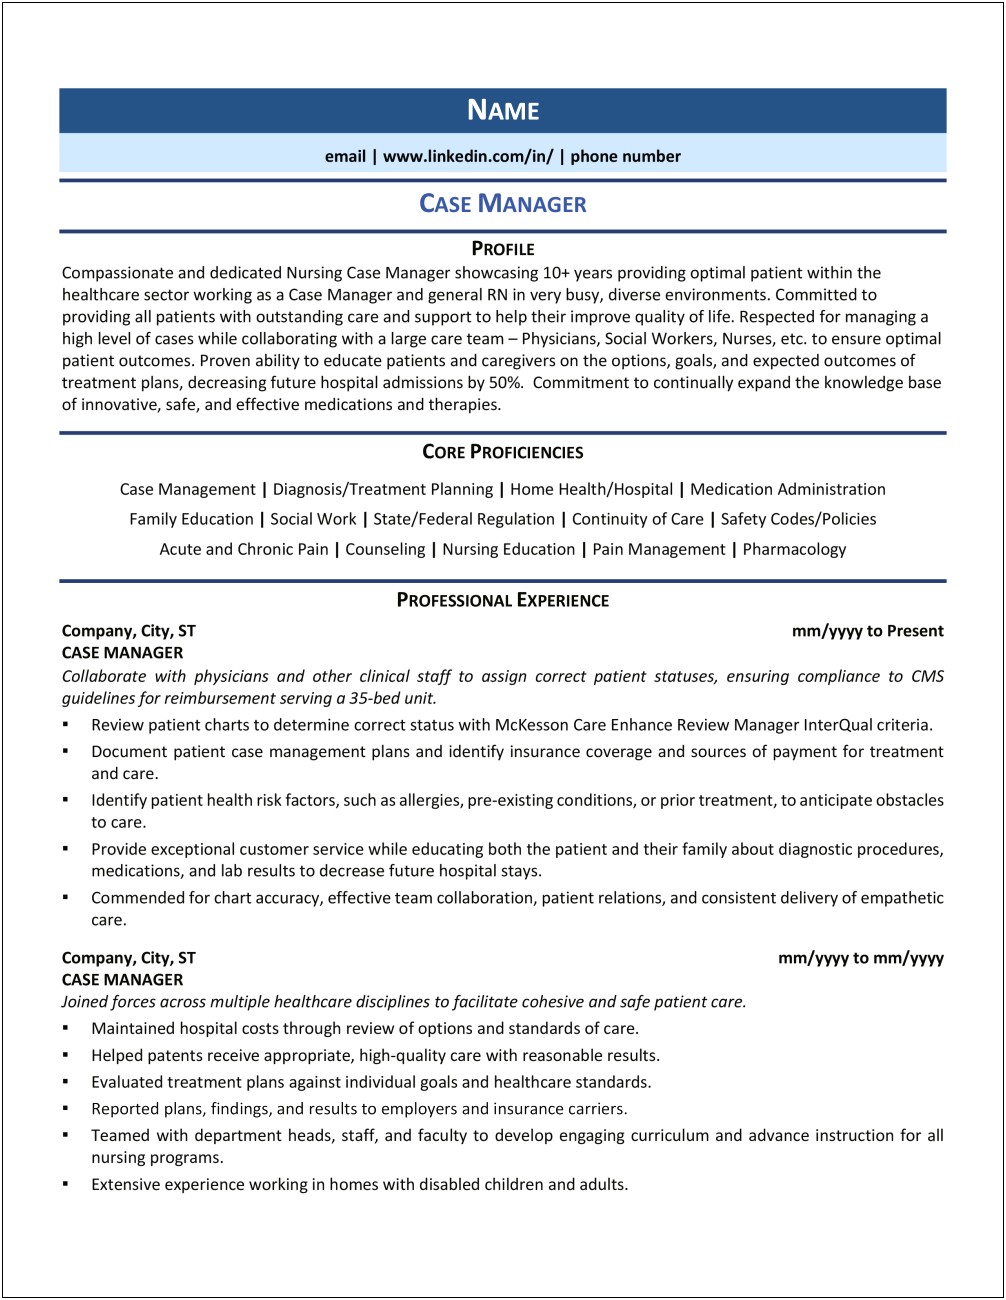 Resume Of A Hospital Case Manager